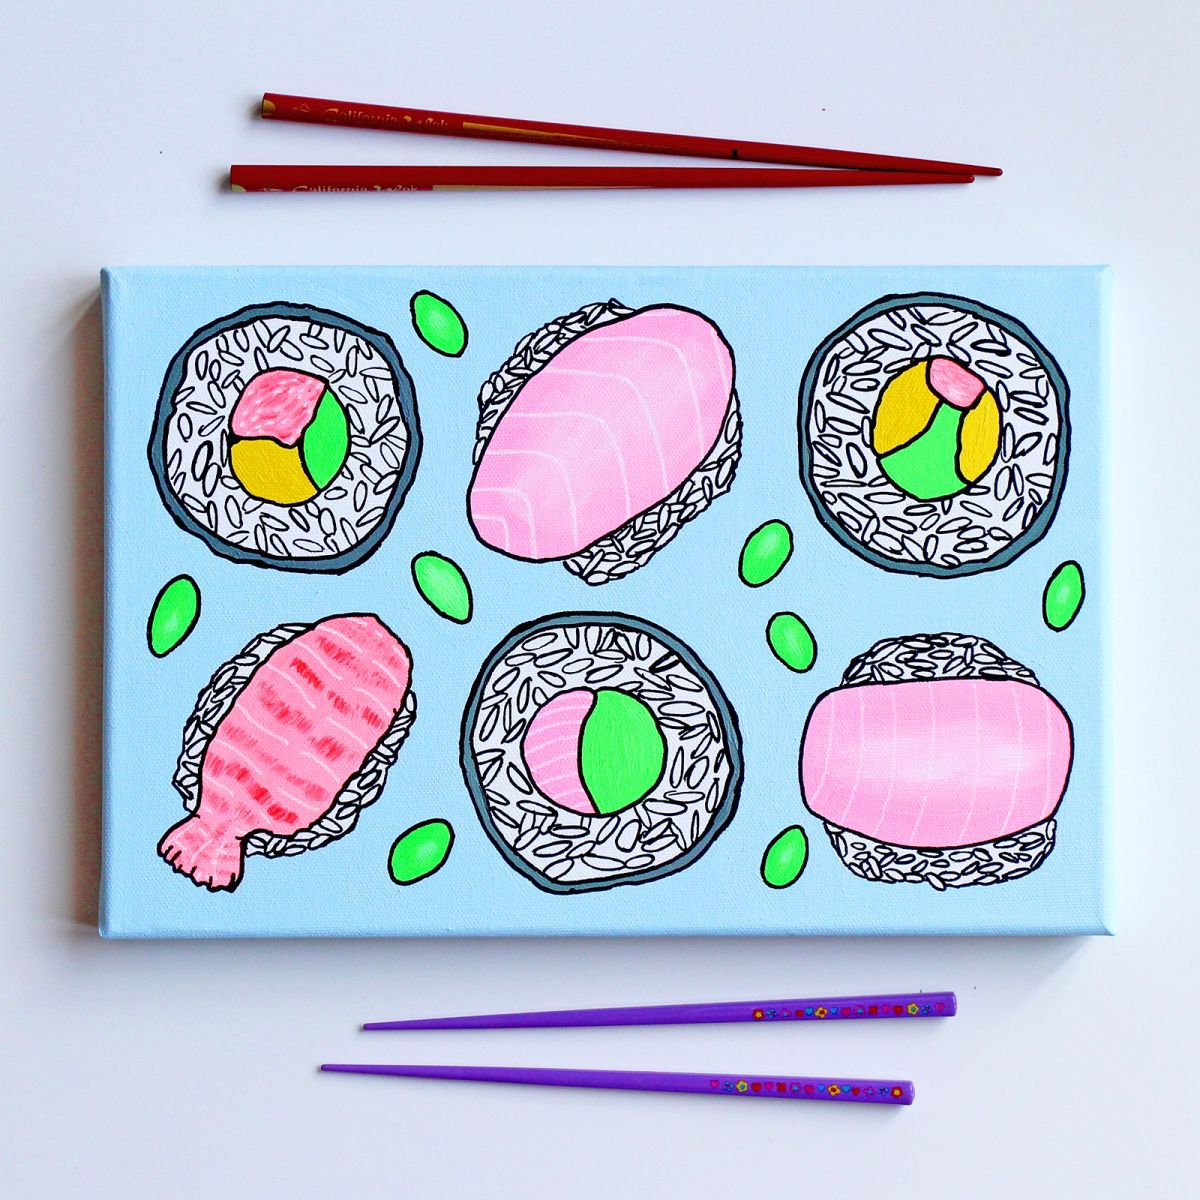 Sushi with Edamame Beans Pop Art Painting on Canvas by Ian Viggars